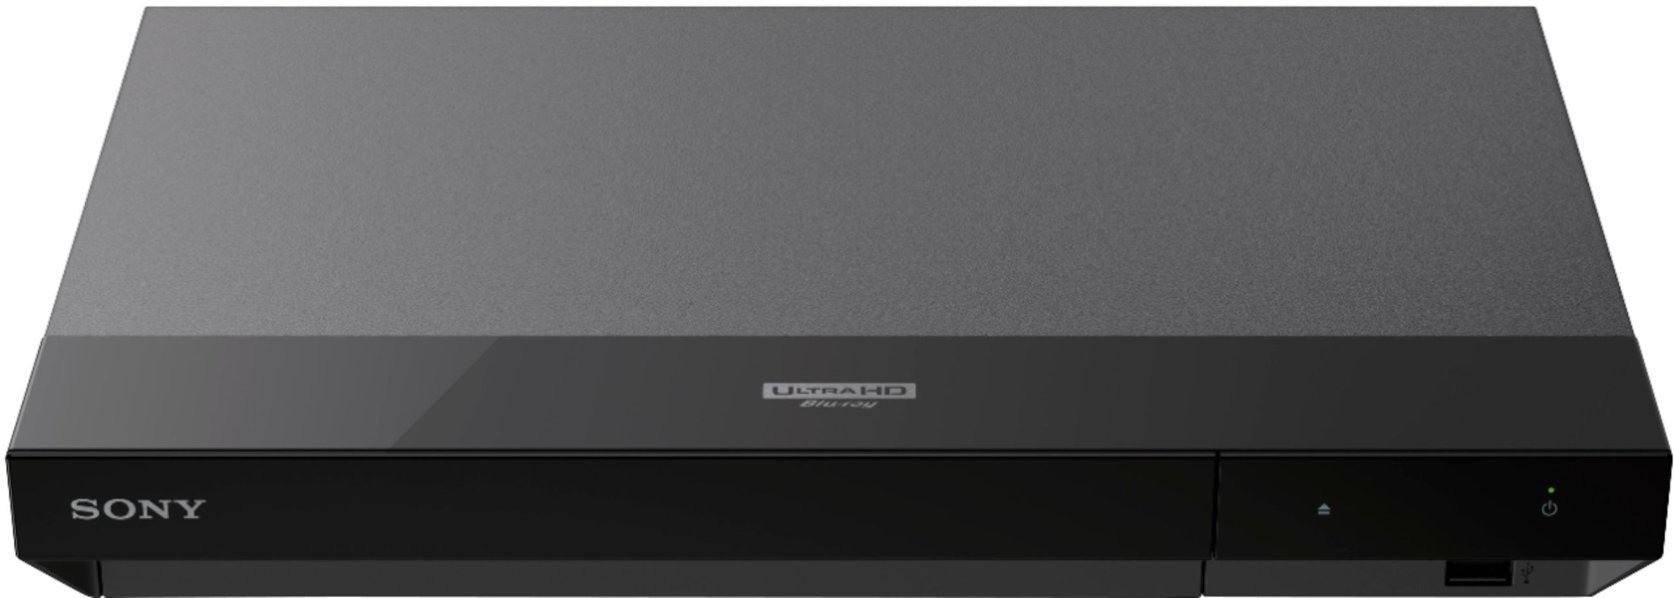 Sony - UBP-X700/M Streaming 4K Ultra HD Blu-ray player with HDMI cable - Black-Black